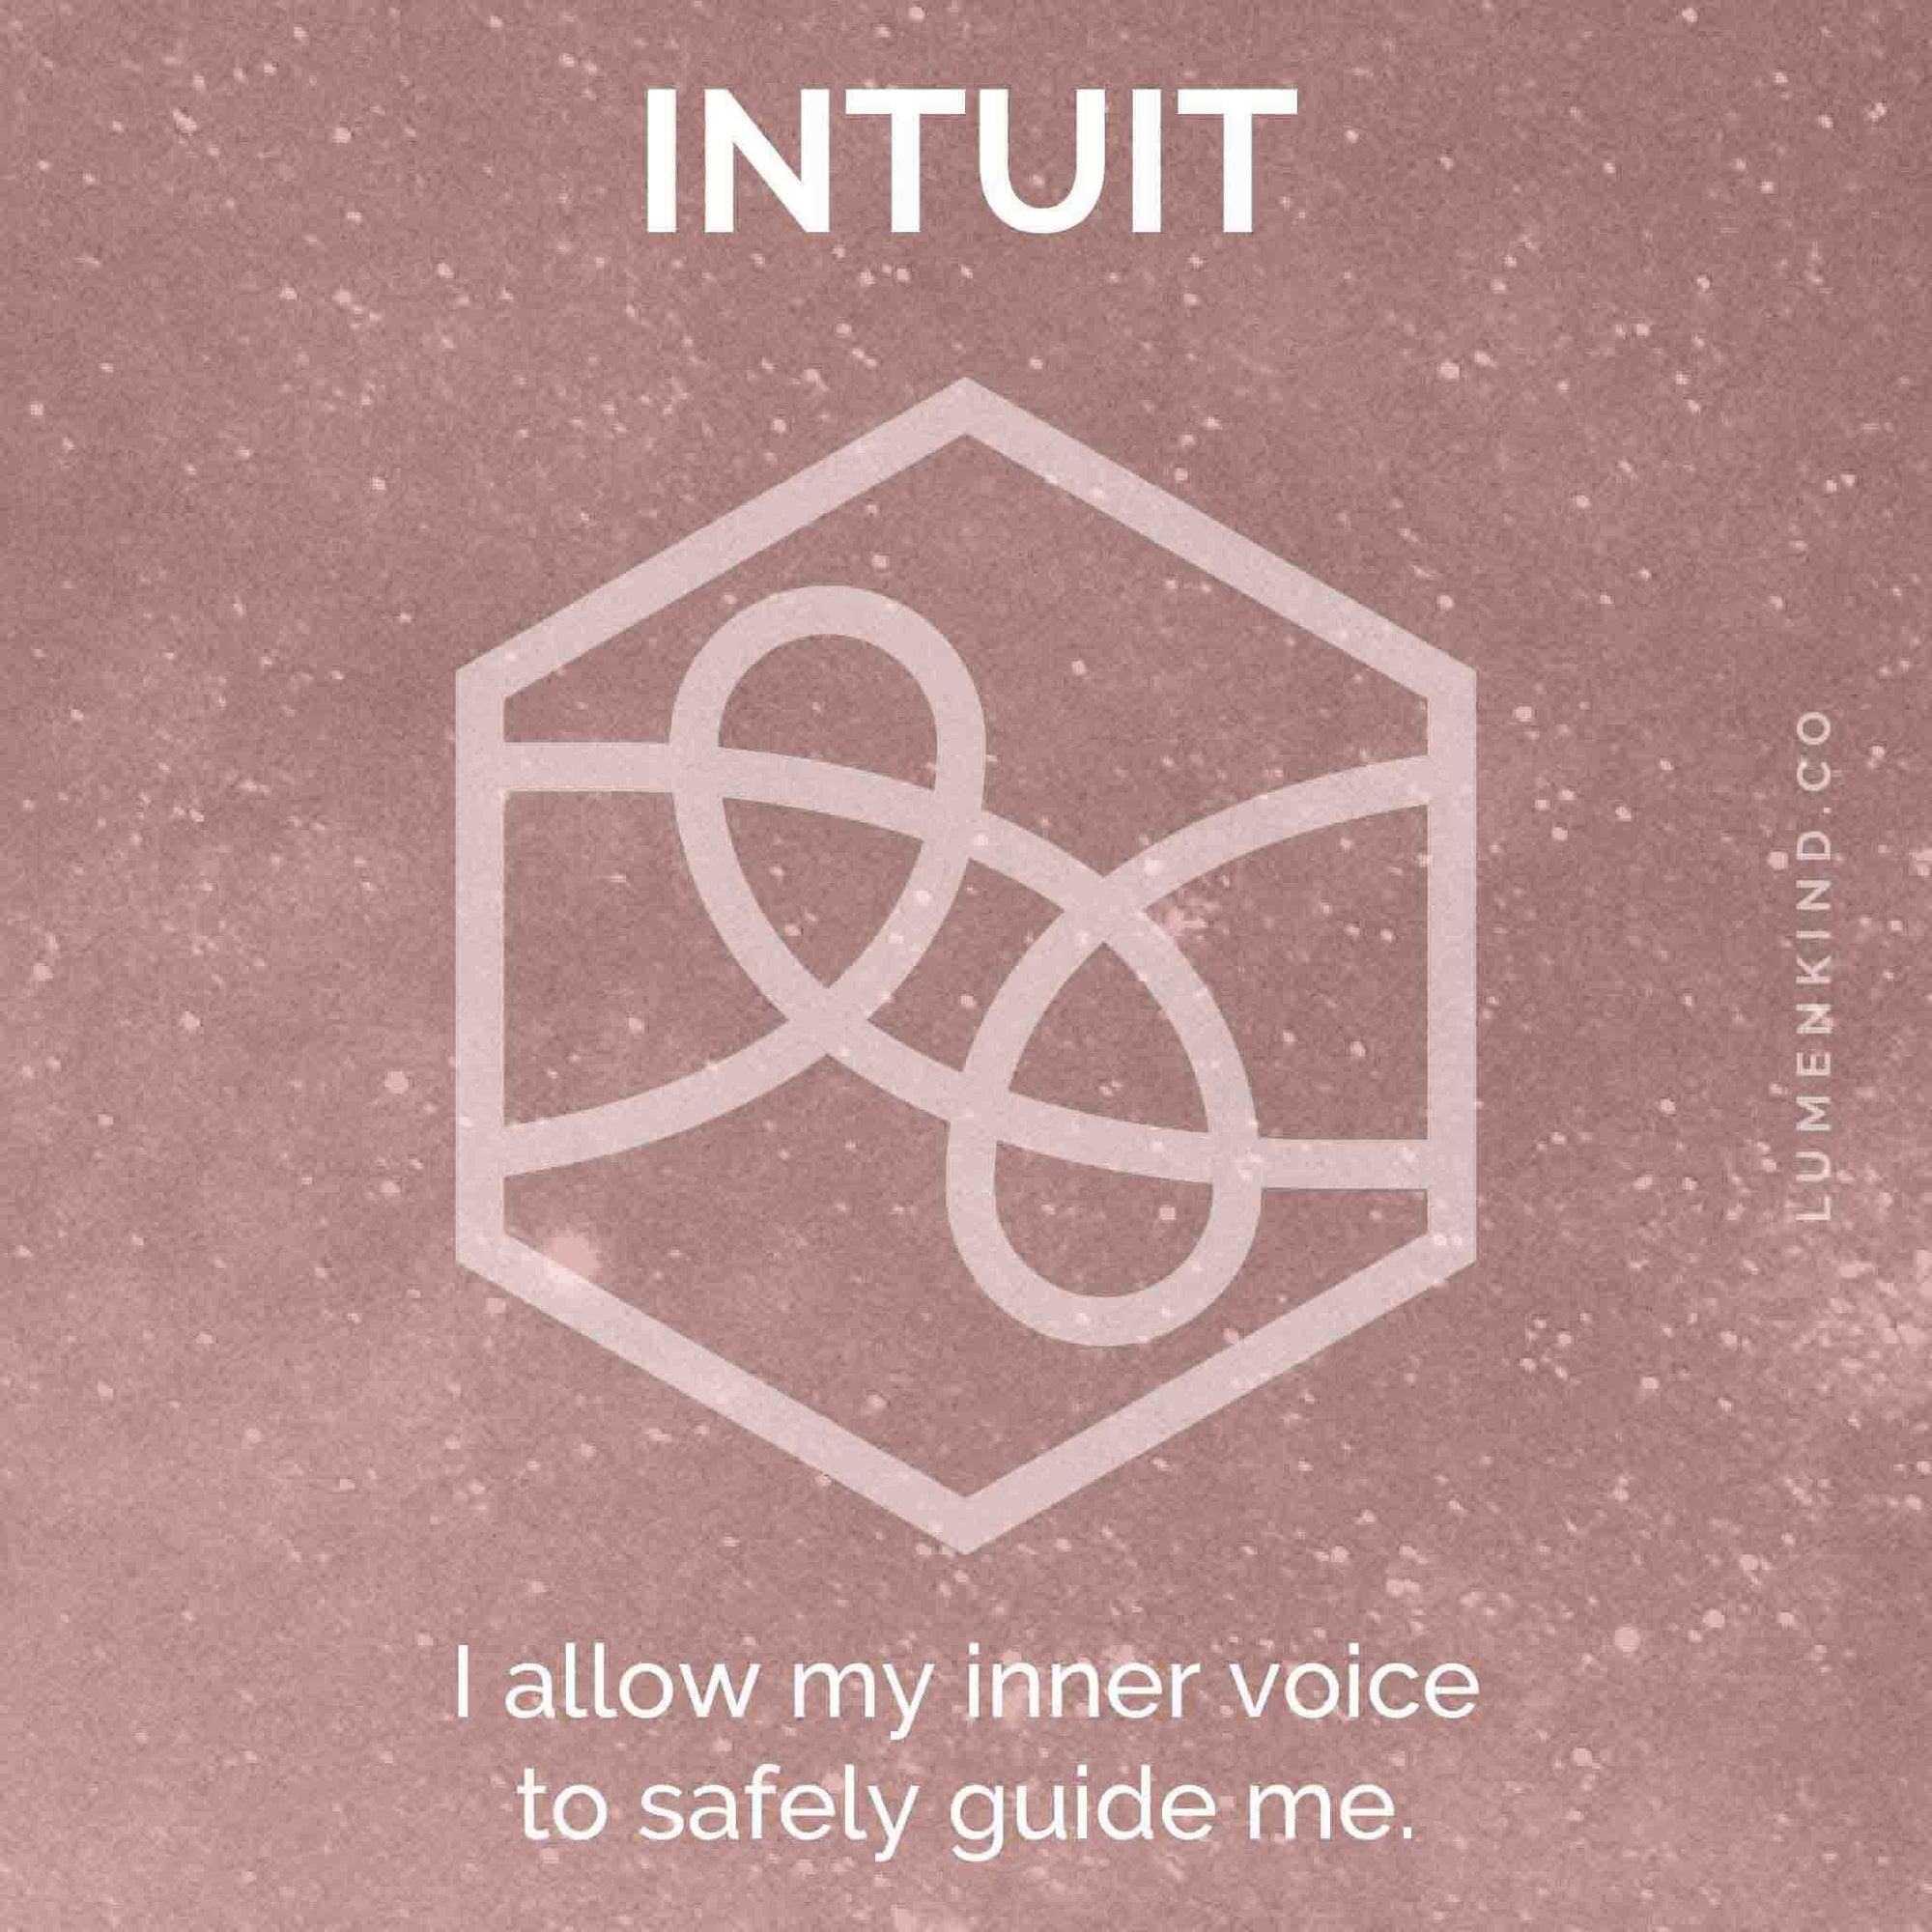 The suggested intention is INTUIT. I allow my inner voice to safely guide me.